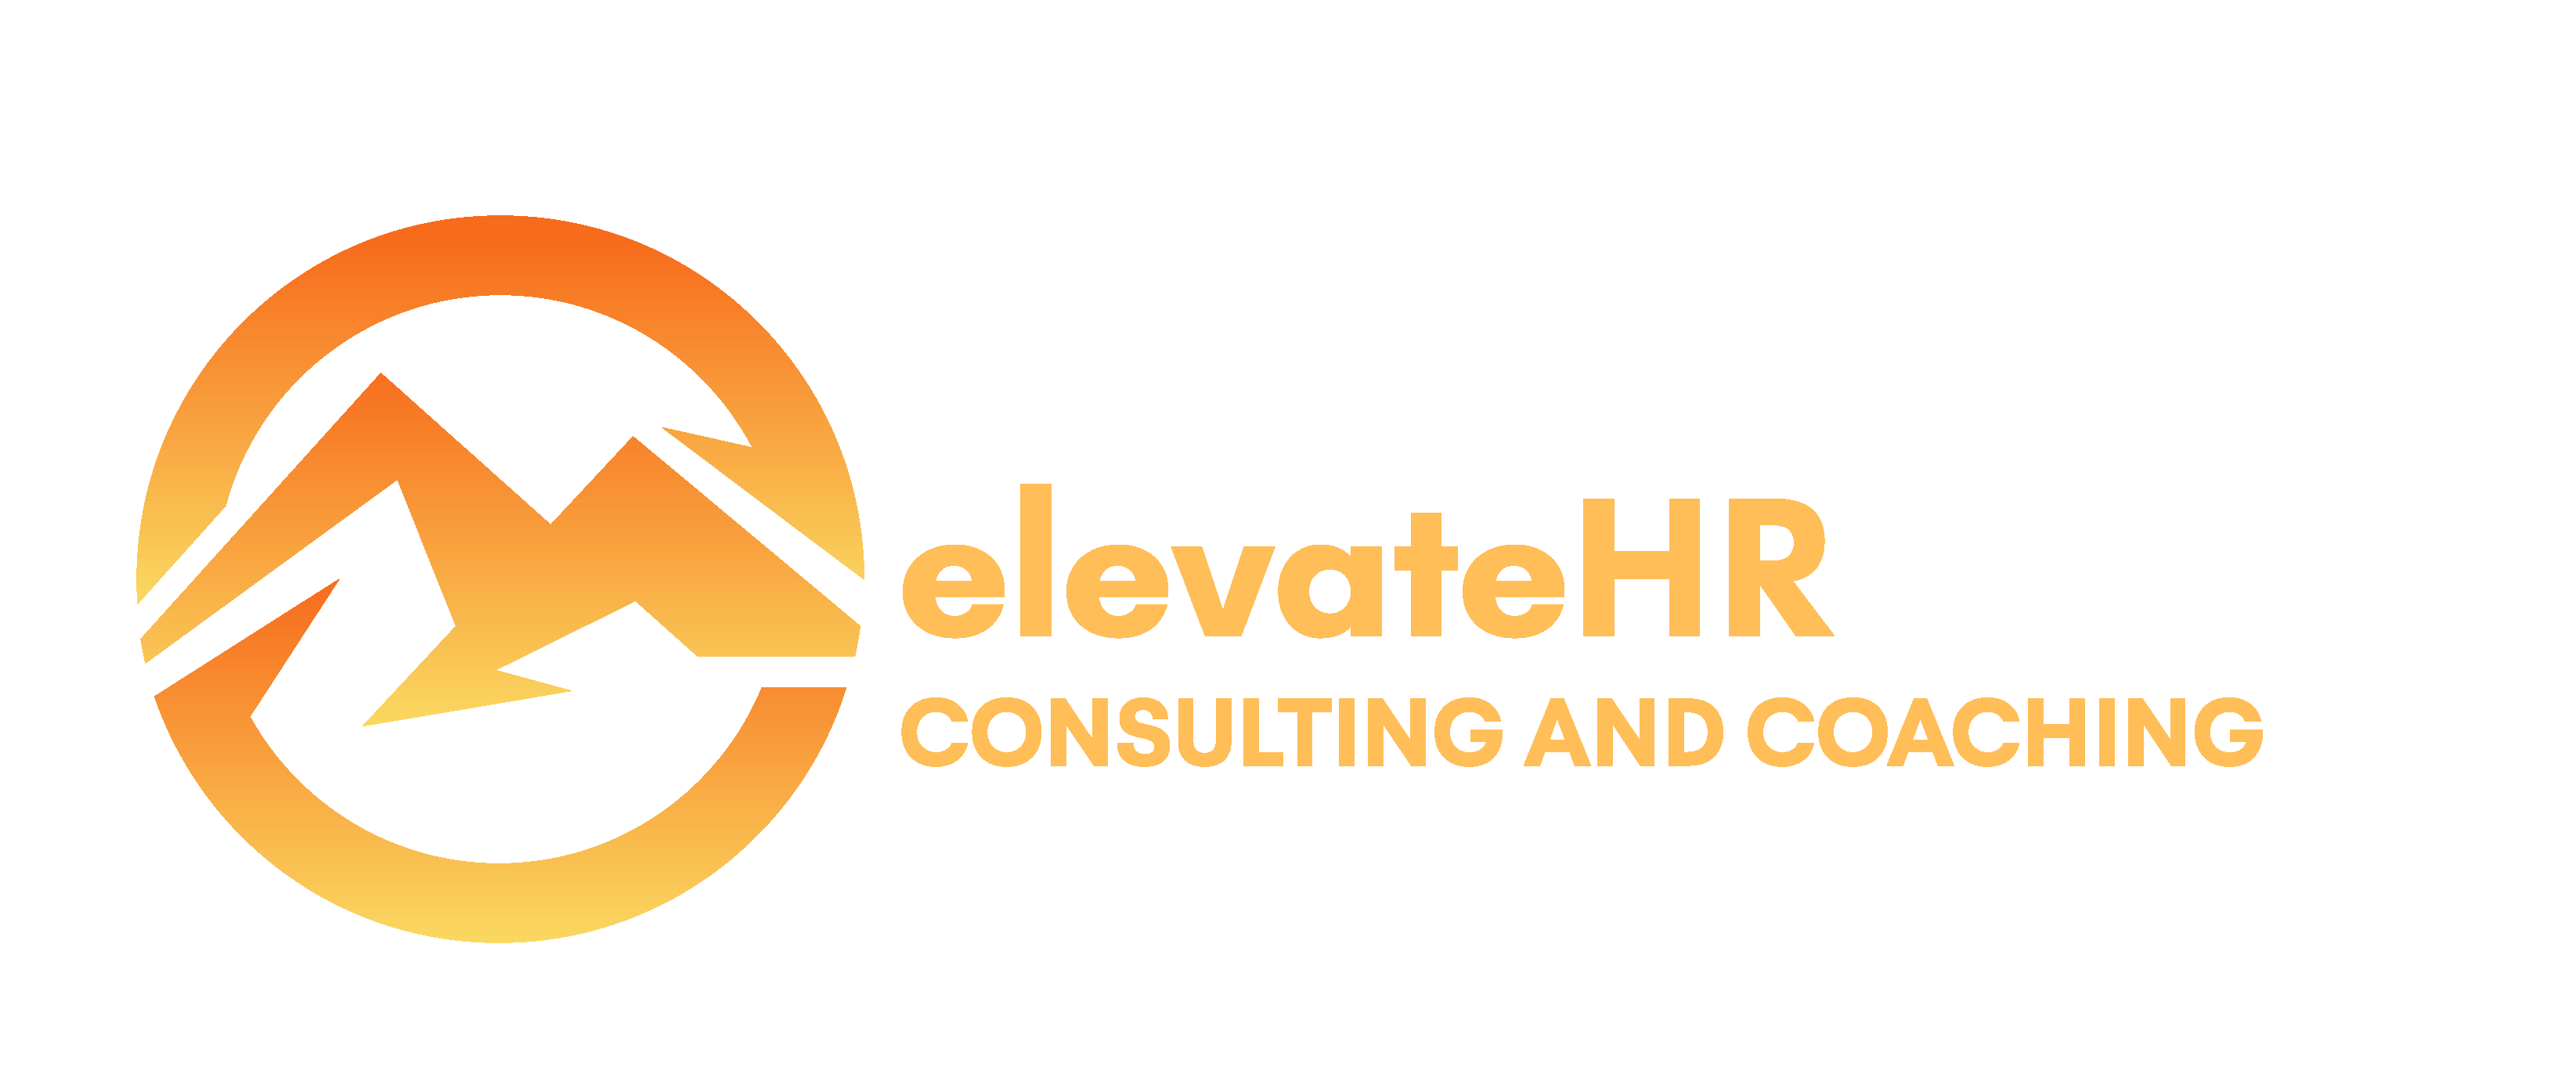 elevateHR Consulting and coaching logo